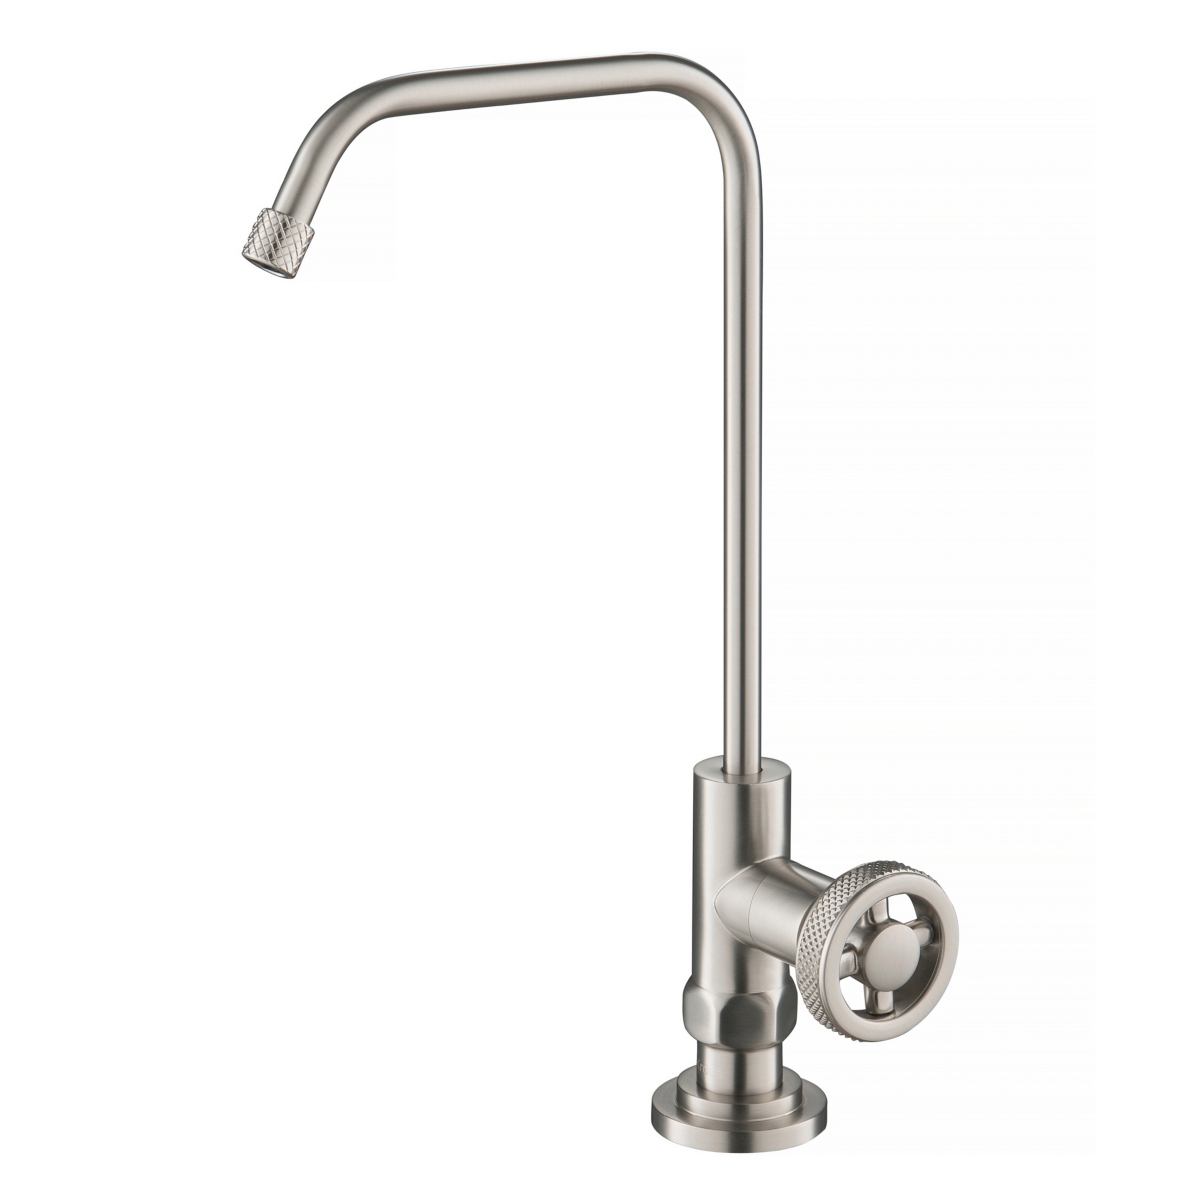 Urbix 100% Lead-Free Kitchen Water Filter Faucet - Brushed gold